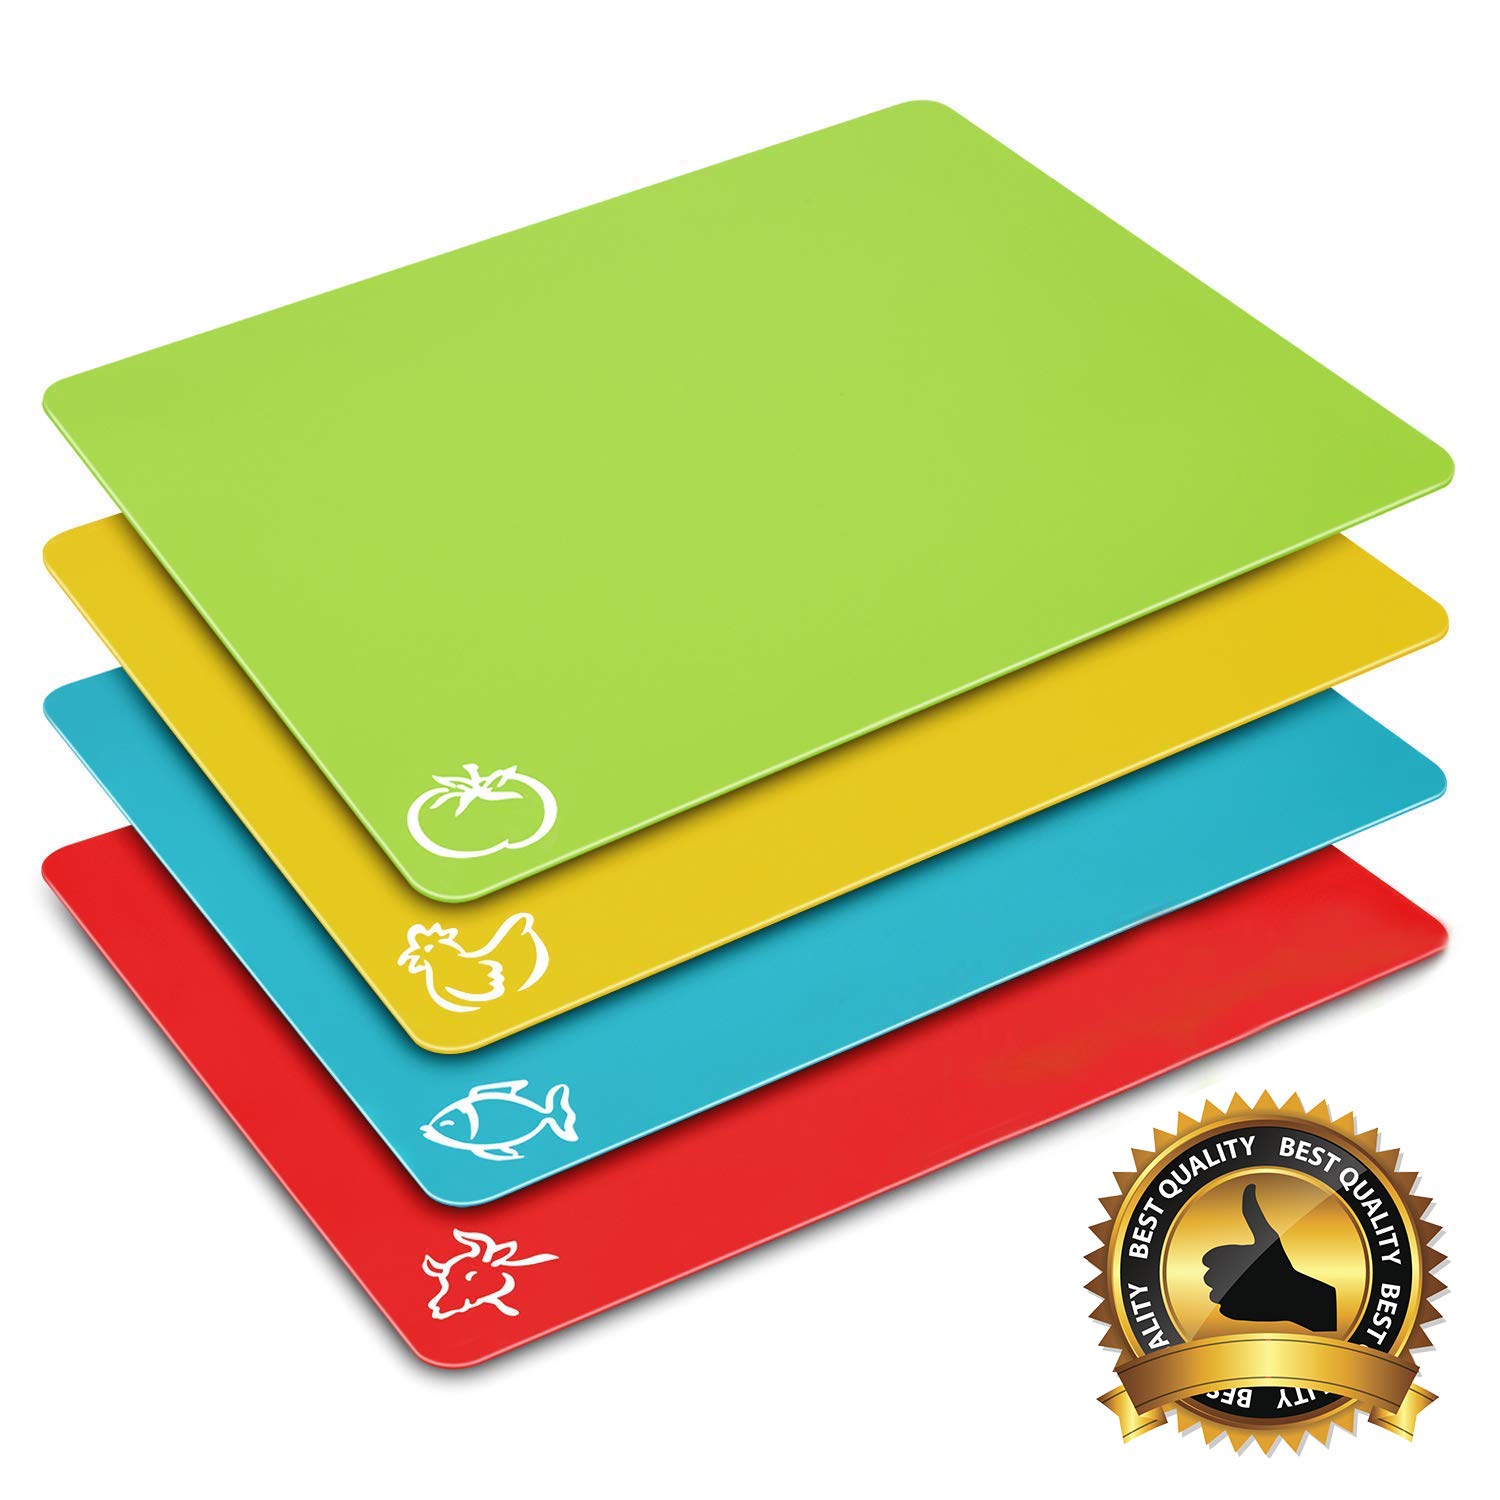 The Cutting Board with Food Icons Prevents Cross Contamination (set of 4)